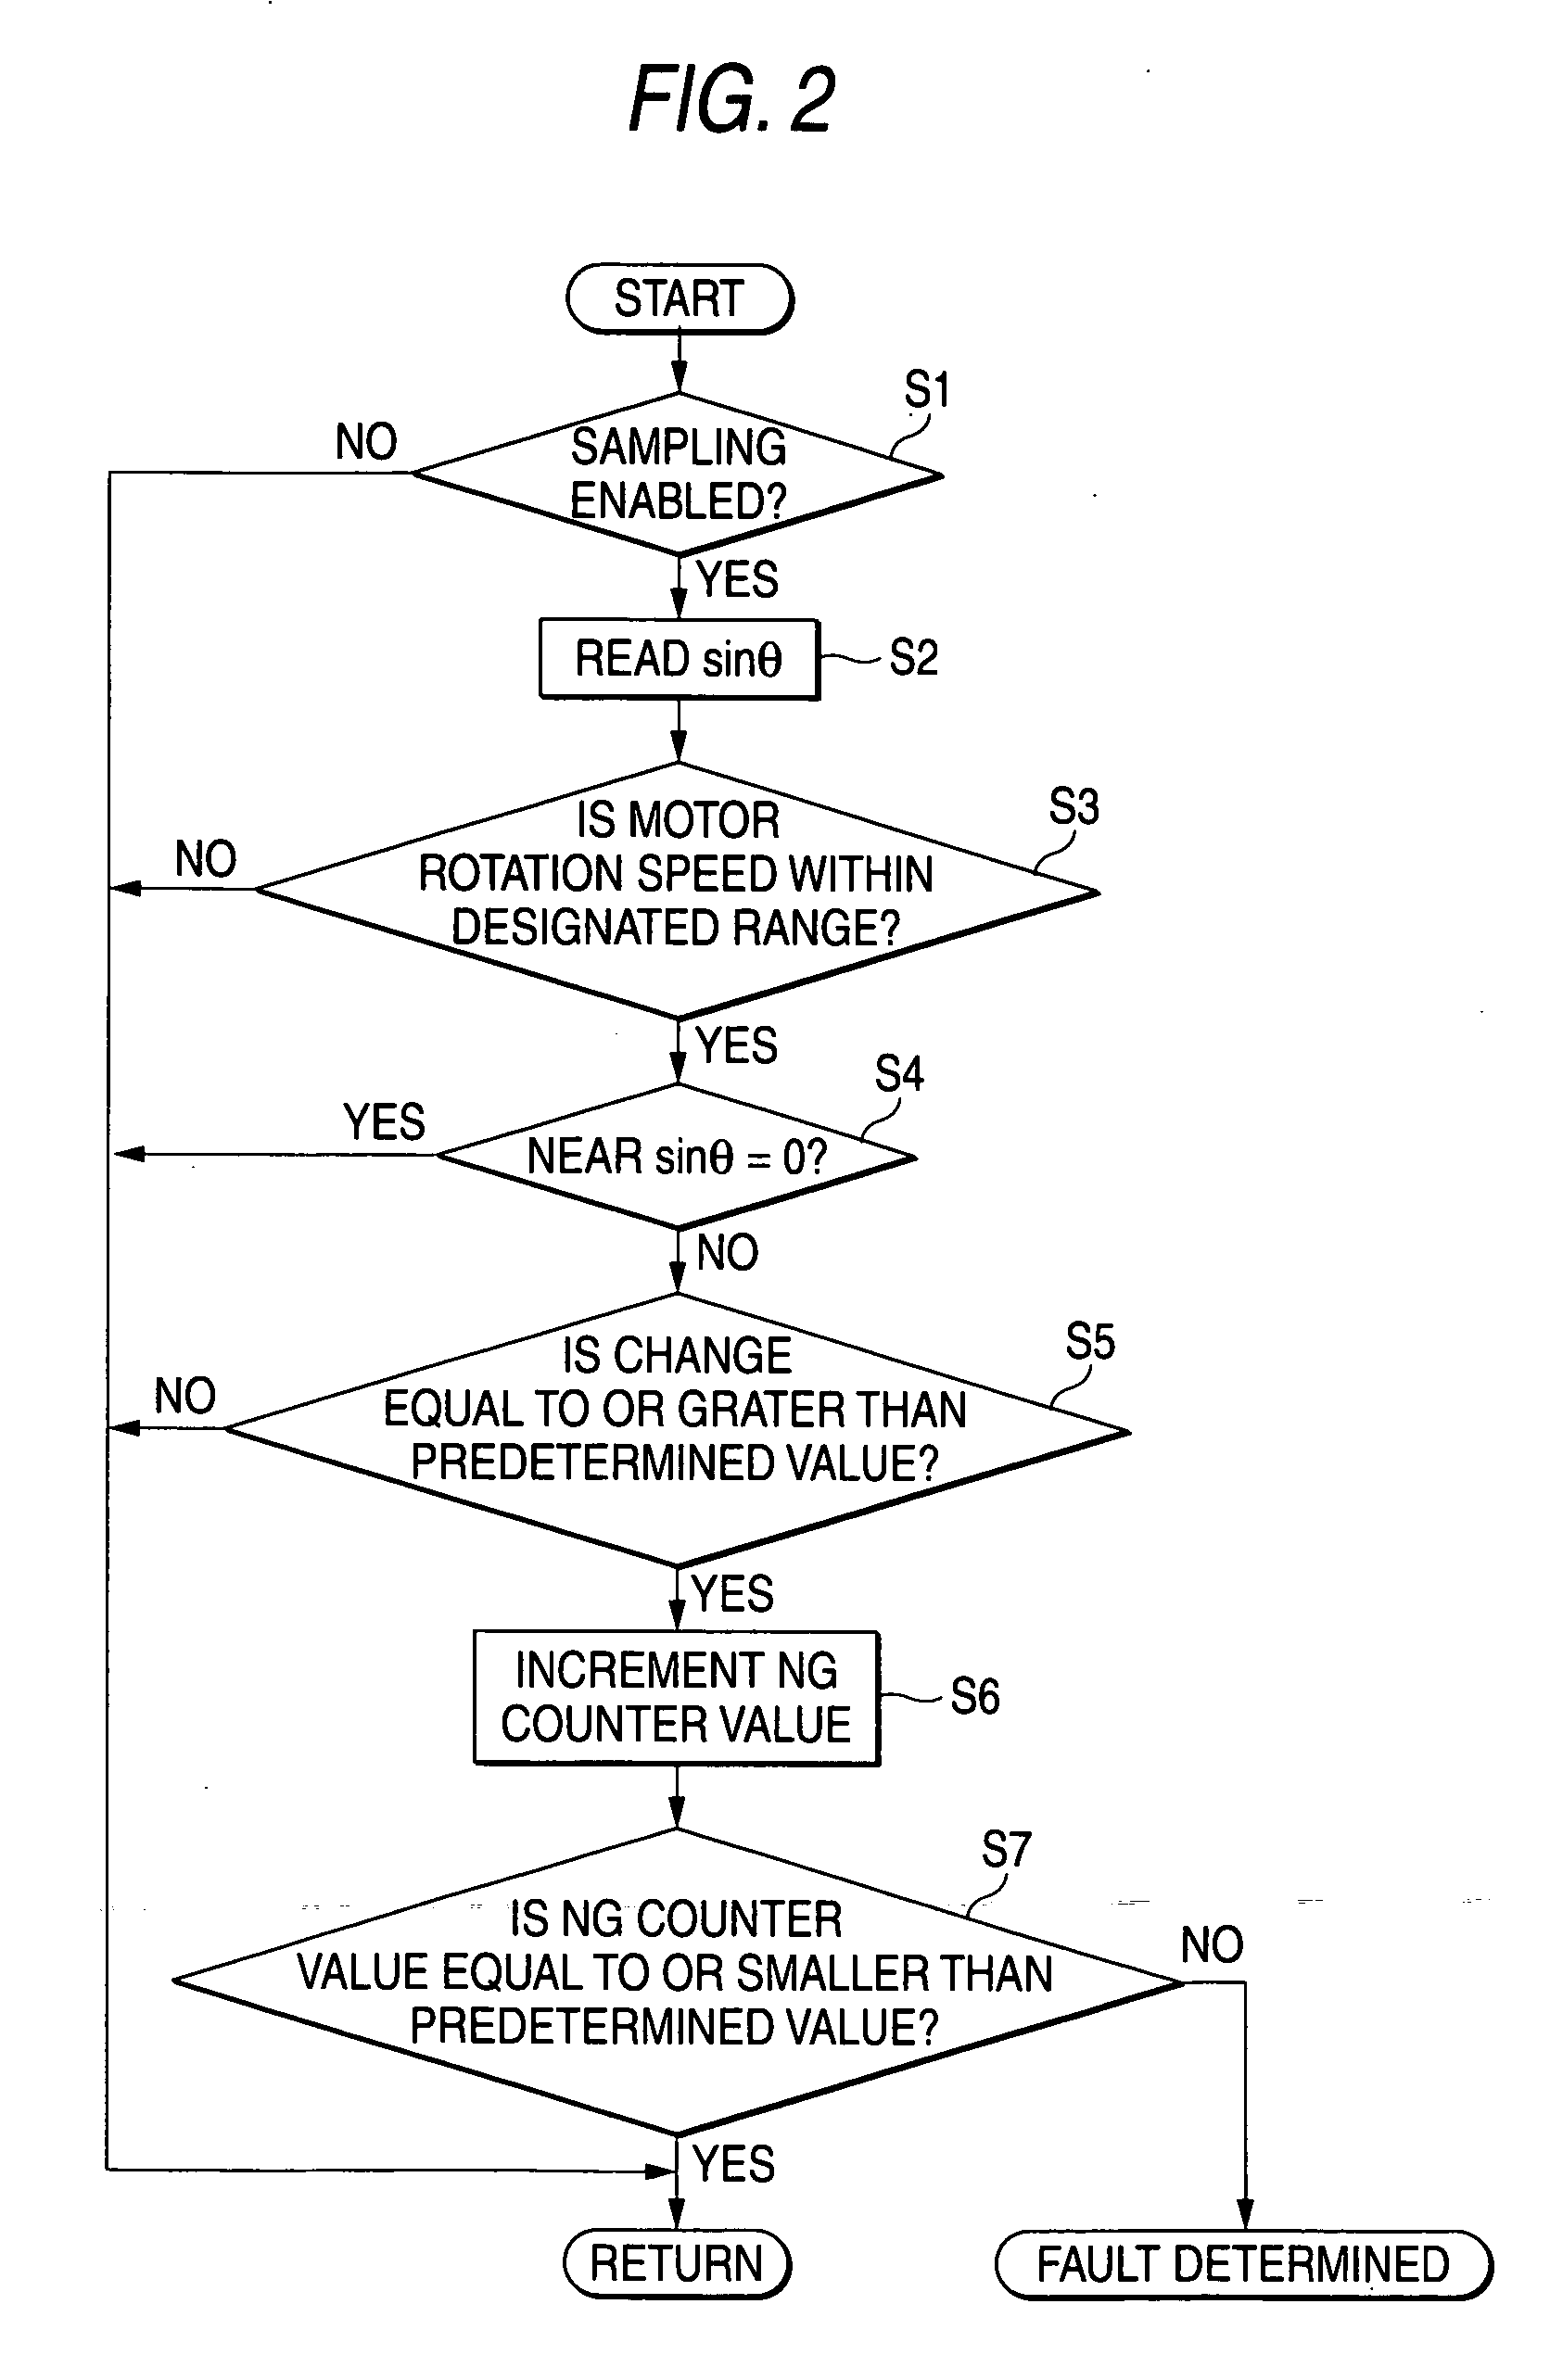 Rotation angle detection device and electric power steering apparatus employing the same